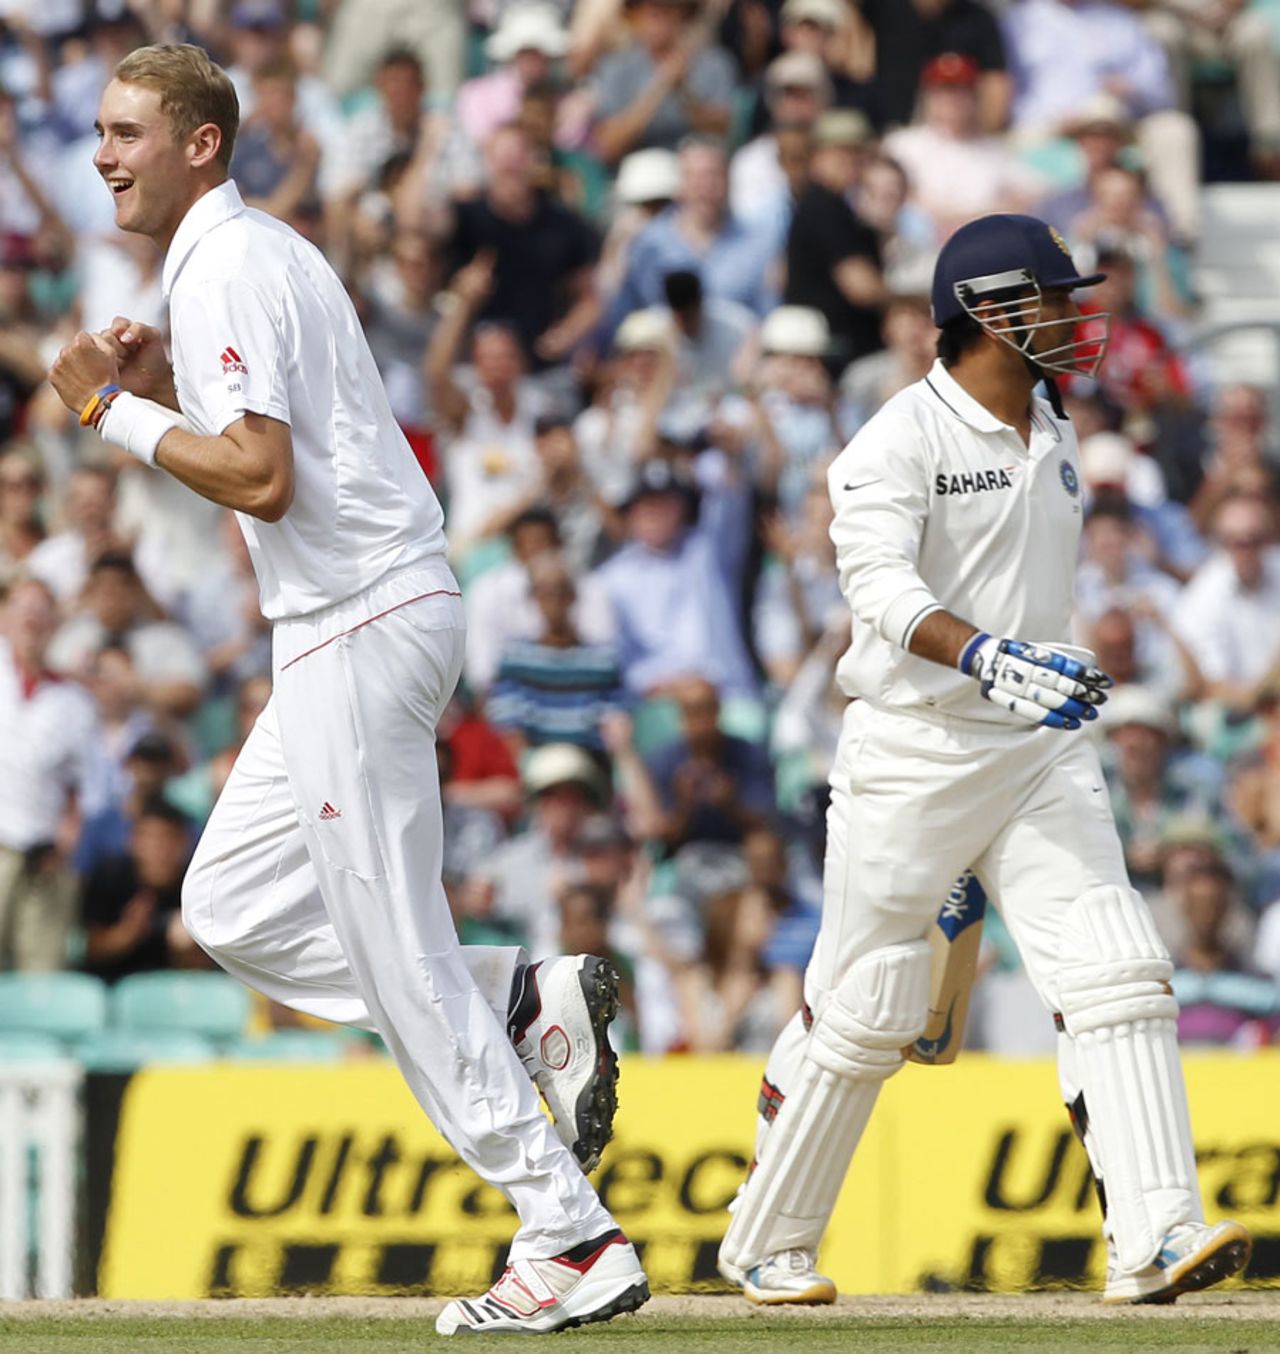 Stuart Broad is thrilled as MS Dhoni walks back, England v India, 4th Test, The Oval, 5th day, August 22, 2011